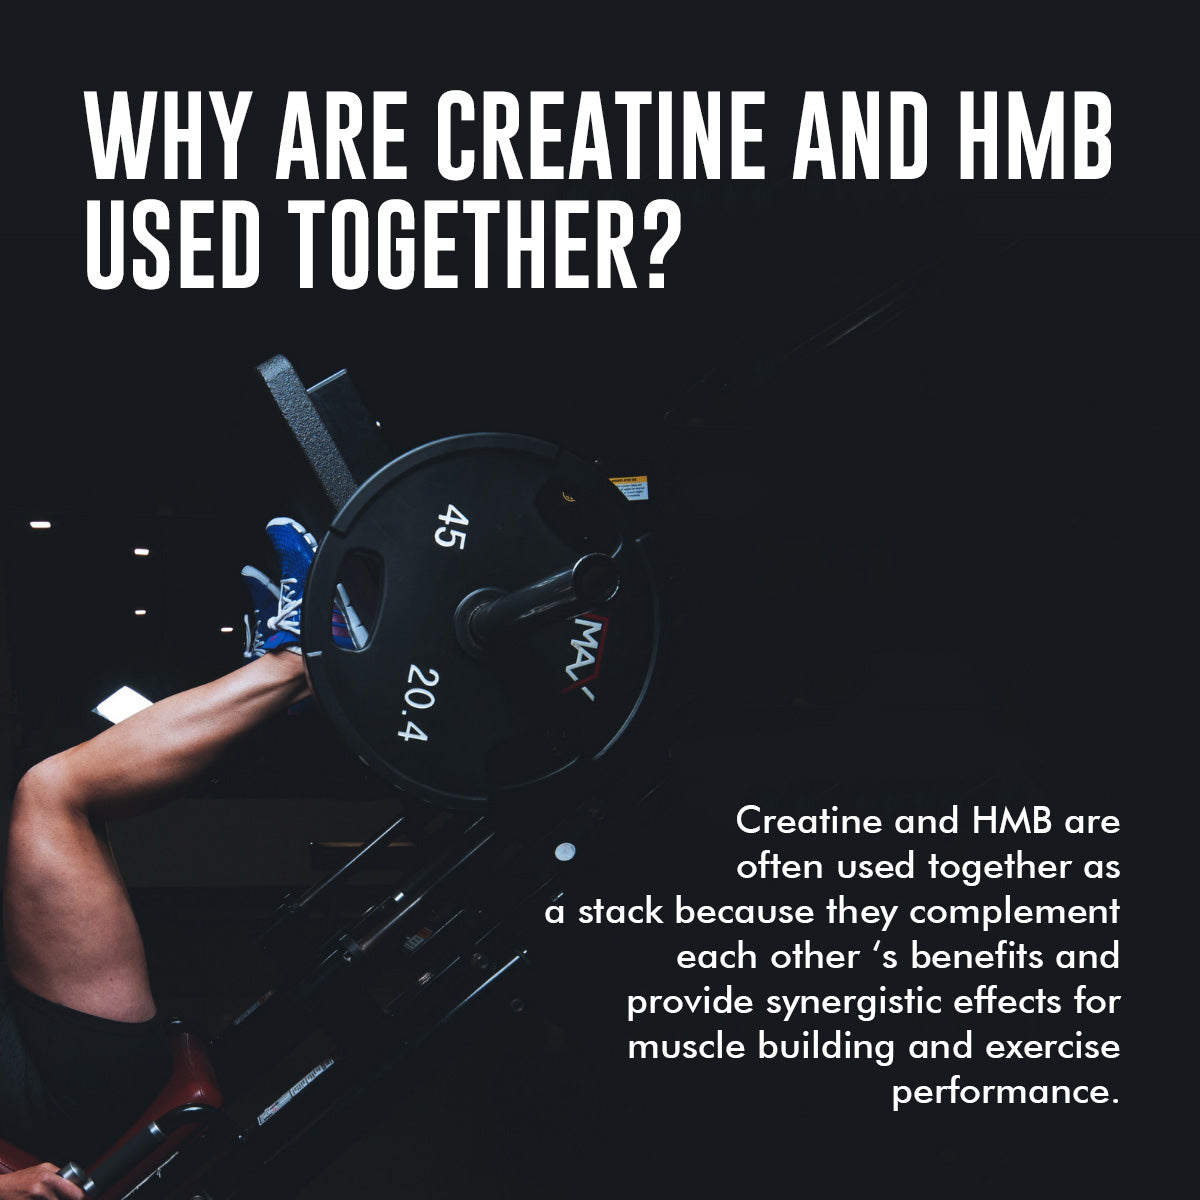 Why are Creatine and HMB used together?